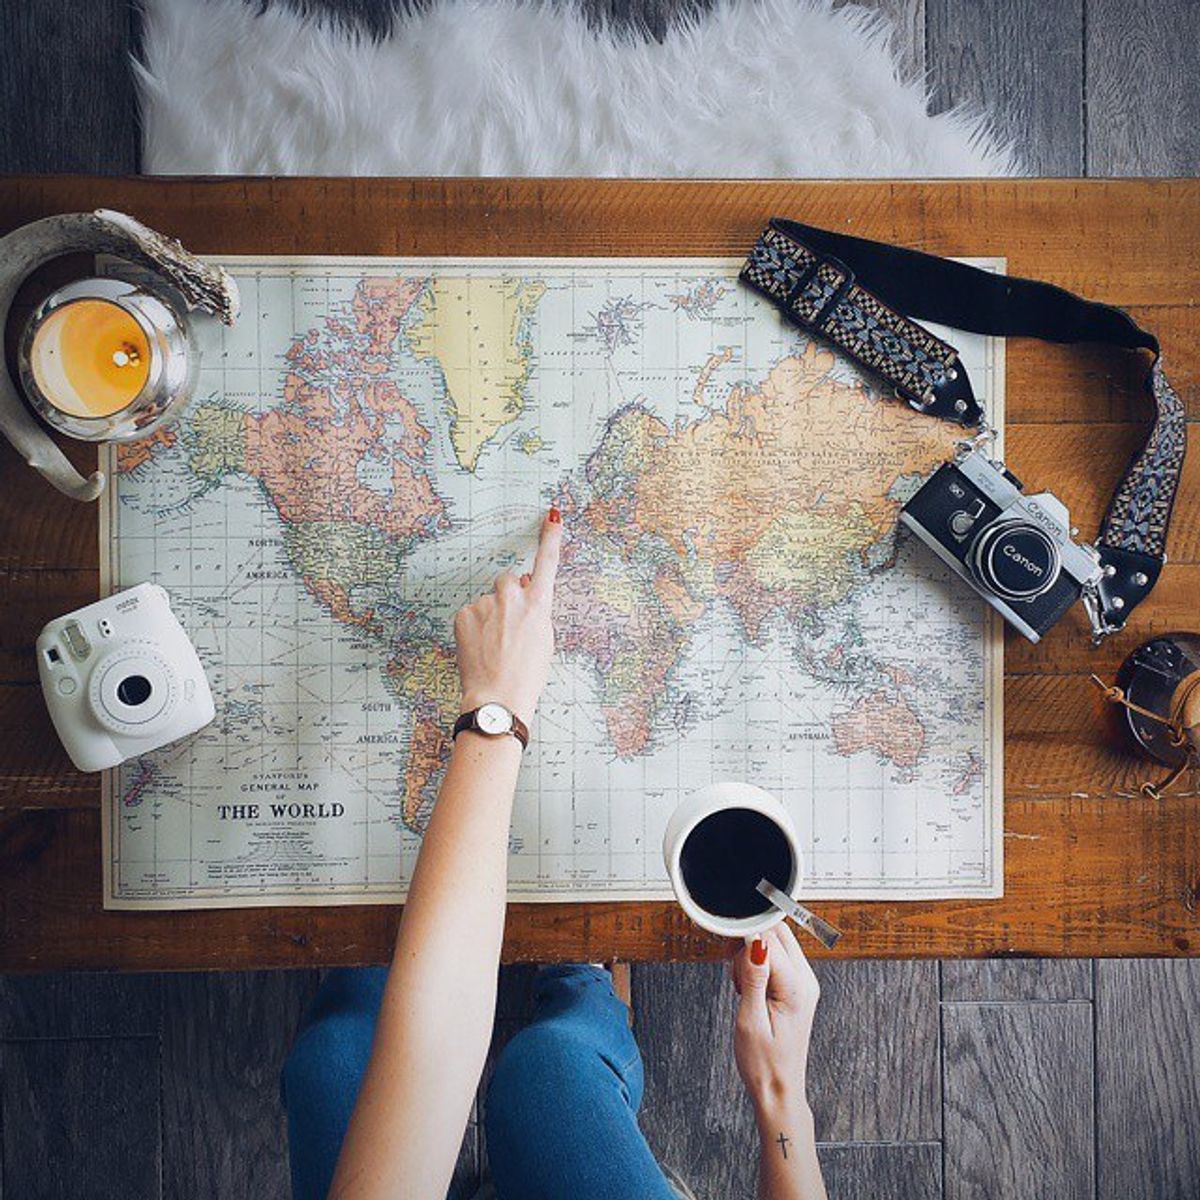 20 Destinations I'd Love To Travel To